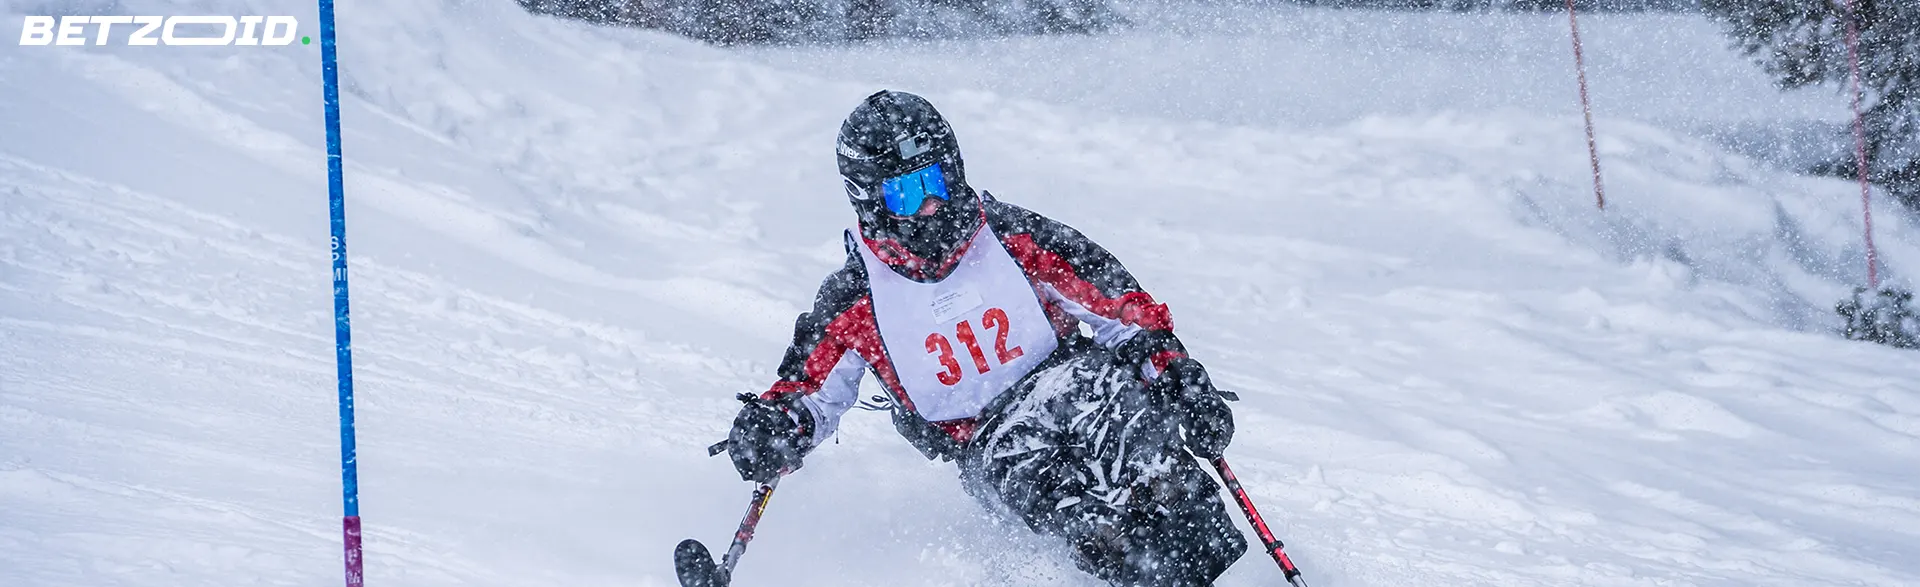 Skier navigating a snowy course during a race, representing Yukon sports betting sites.